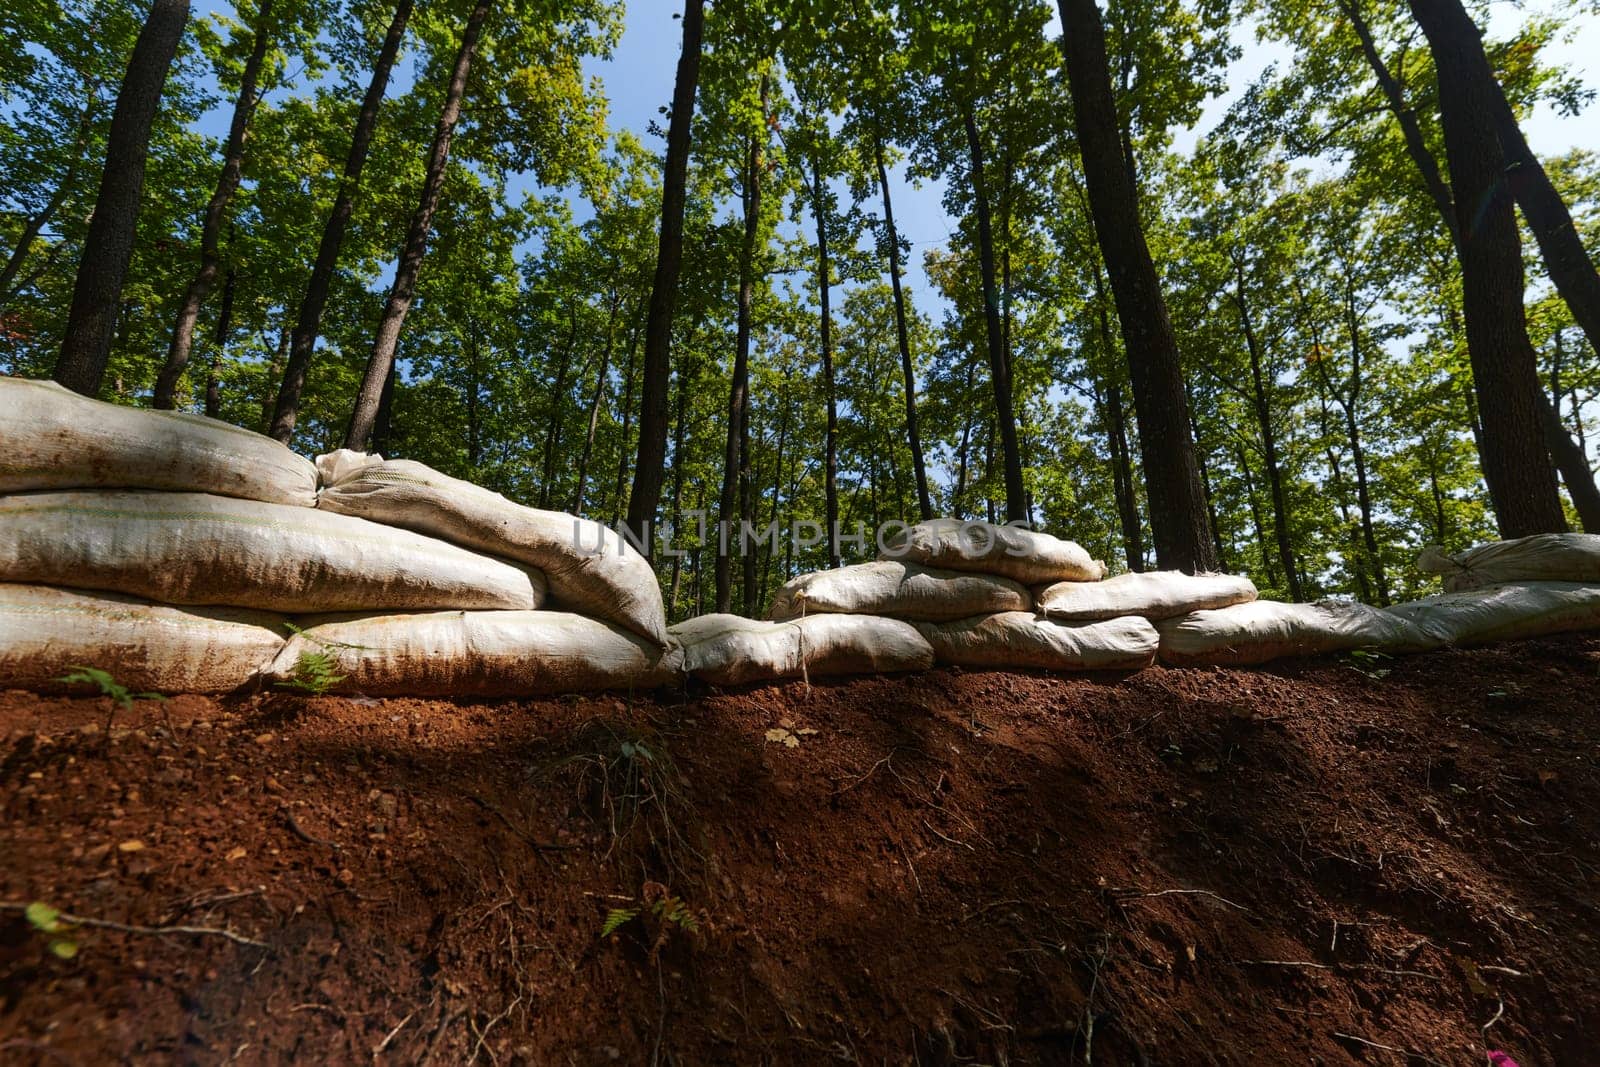 a military unit strategically employs sandbags as a defensive wall, creating a fortified barrier to enhance their safety and protection, showcasing the tactical use of simple yet effective measures in their encampment. by dotshock